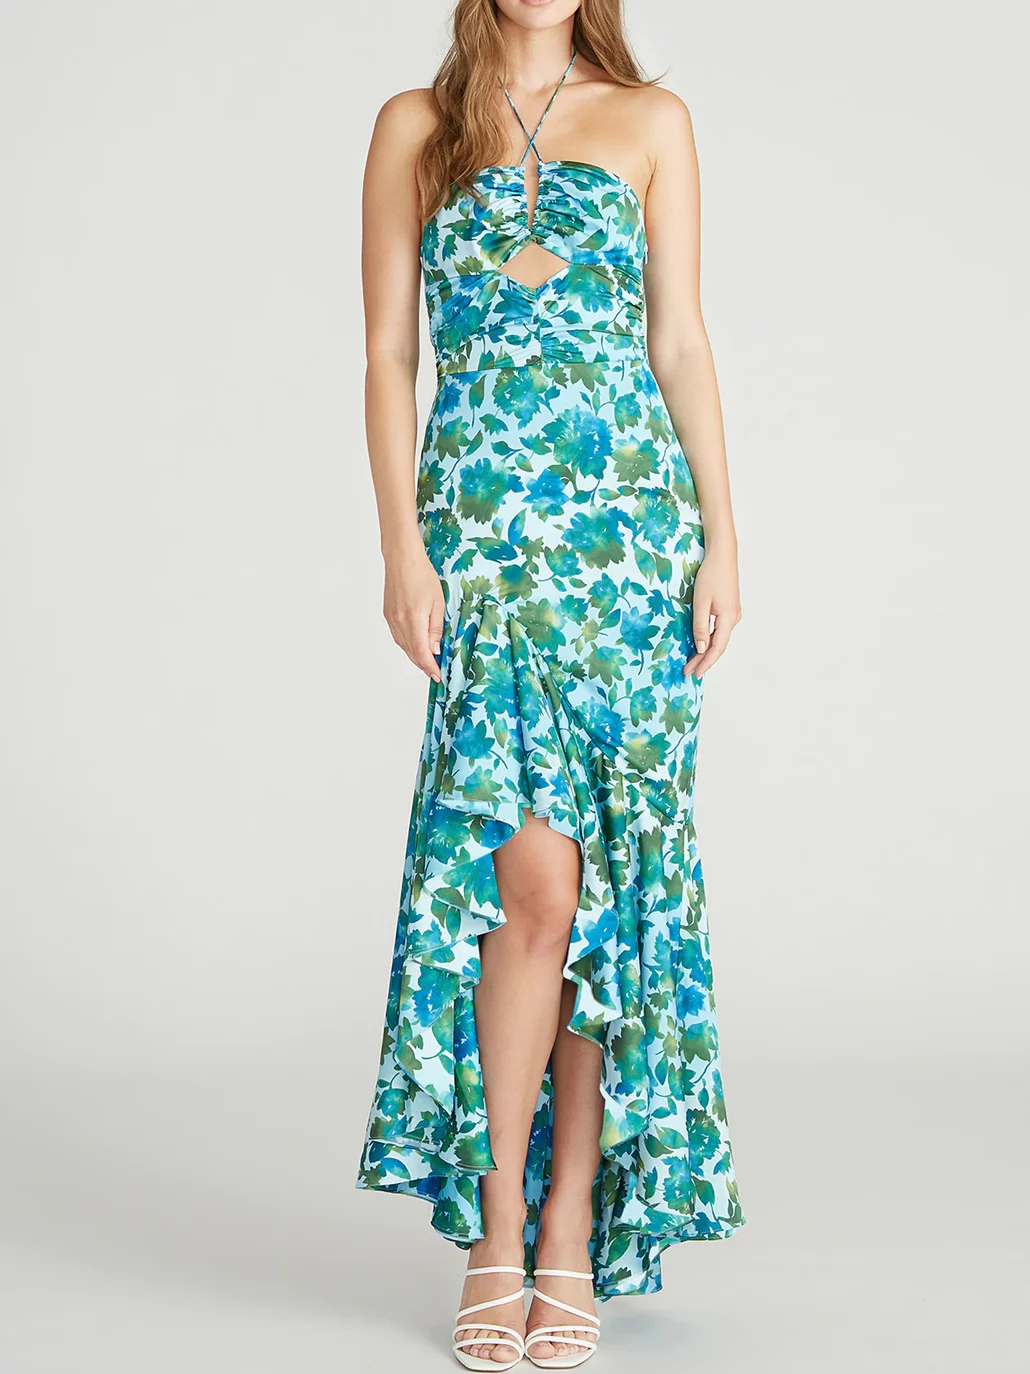 Blue and green floral high-low midi dress. Neckline is halter with keyhole cutout below the bust. There are ruffles around the hem.